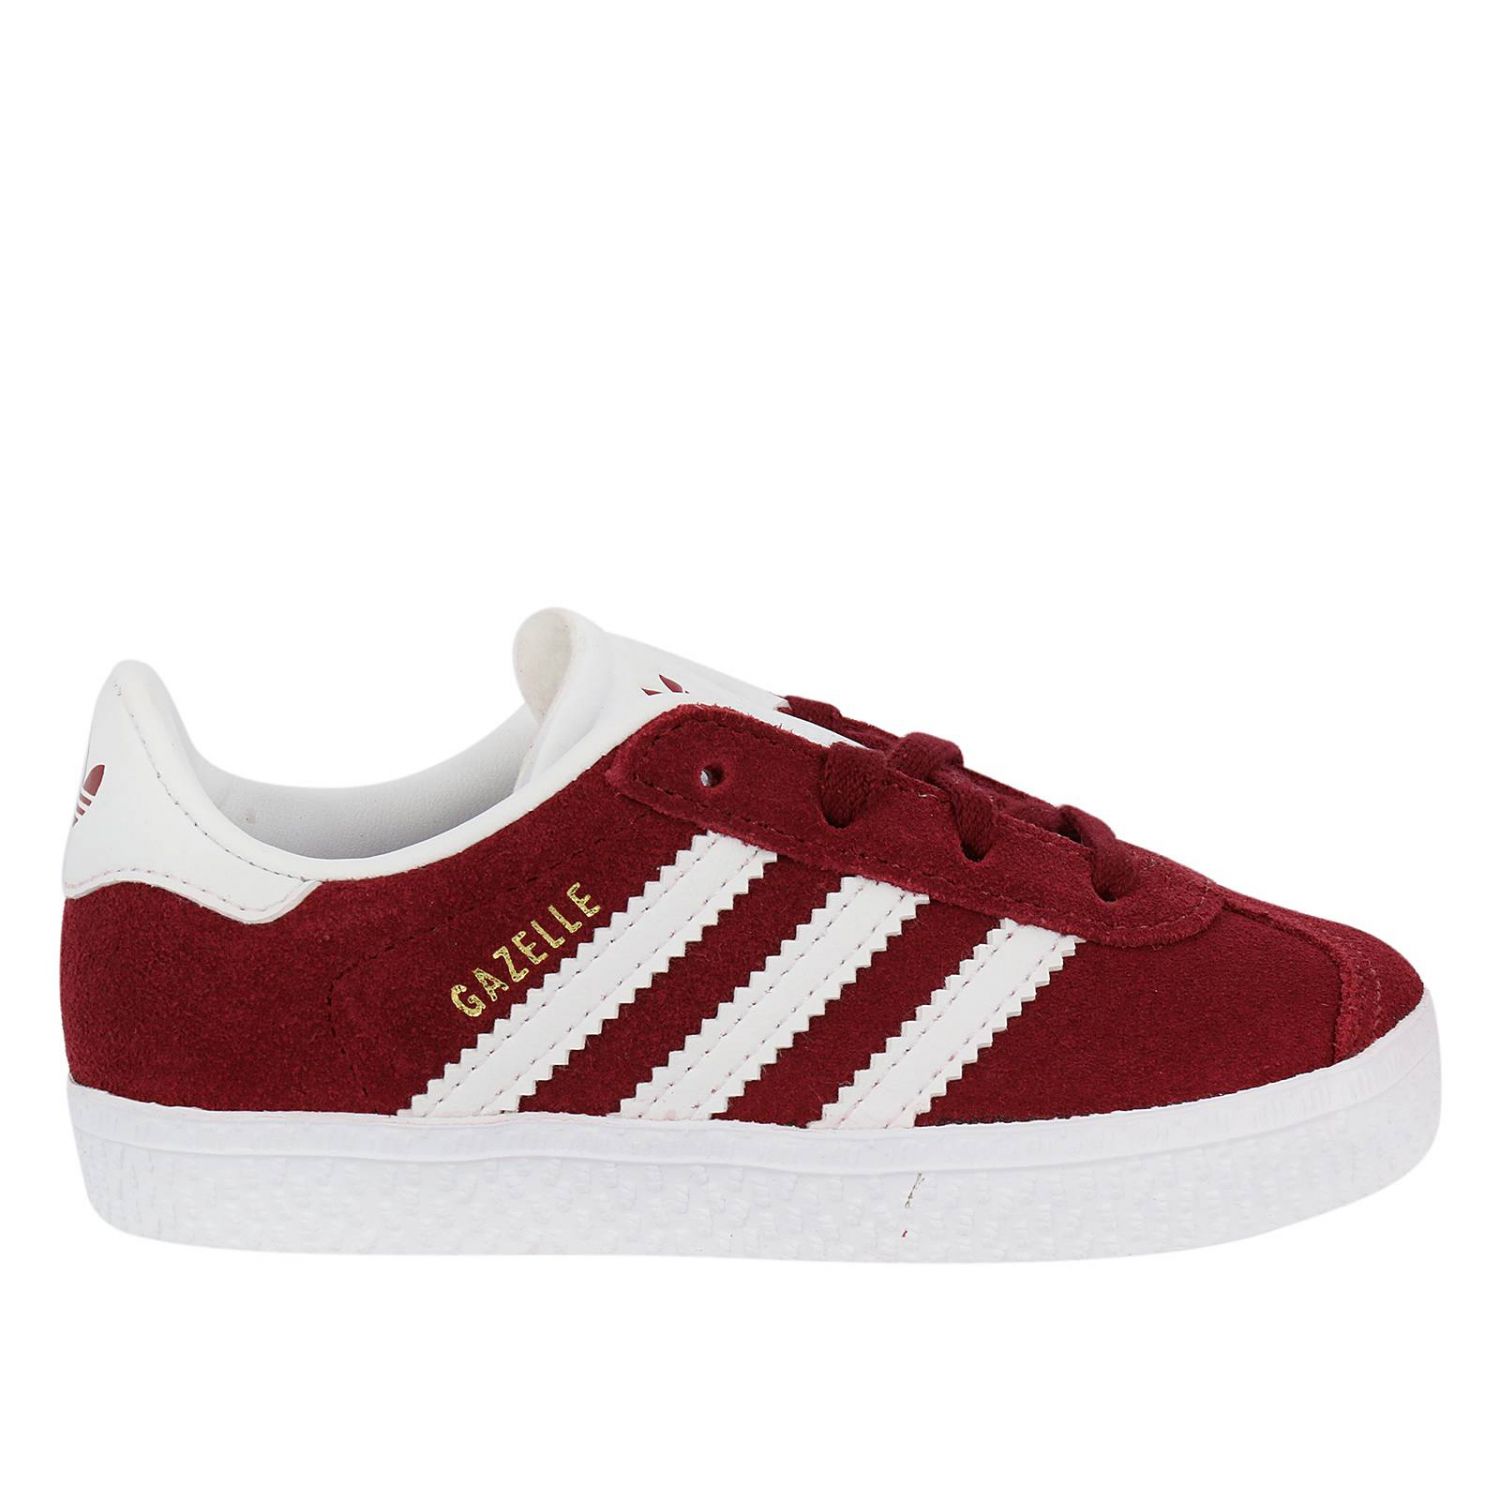 Adidas Originals Gazelle I Classic kids' sneakers in smooth suede leather صابون بابايا  في